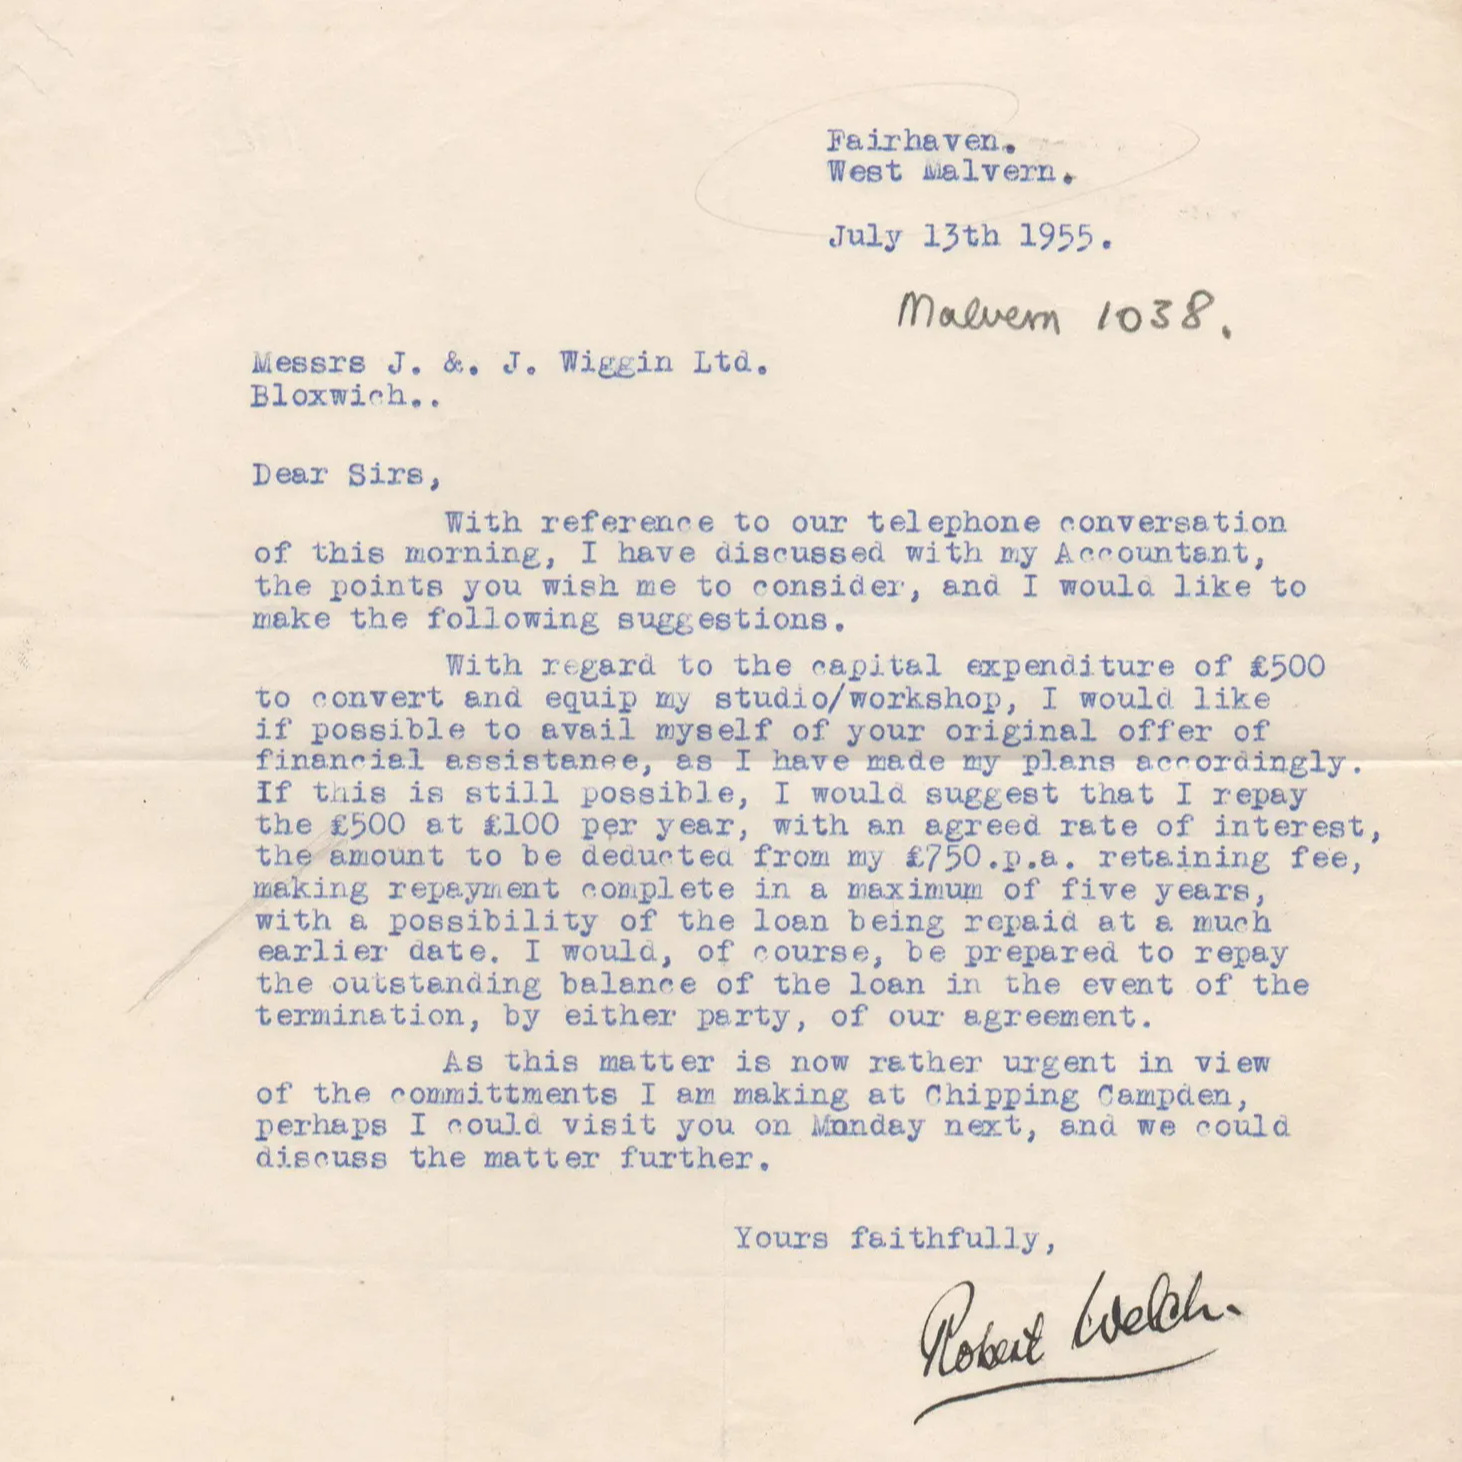 Letter from Robert Welch to J. & J. Wiggin